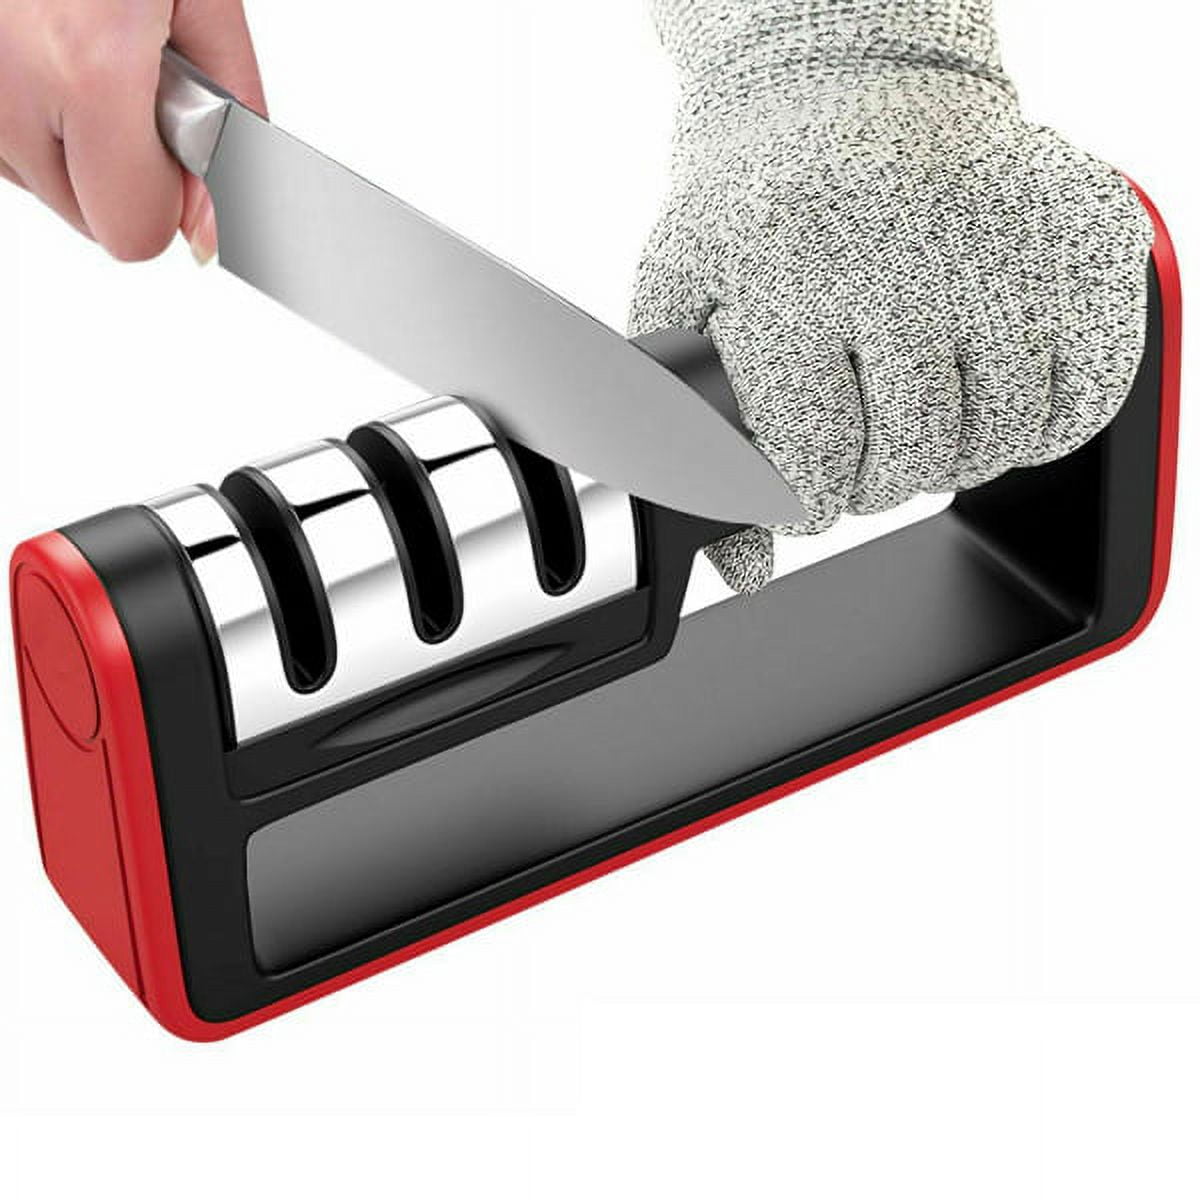 4-in-1 longzon [4 STAGE] Knife Sharpener with A Pair of Cut-Resistant Glove, Original Premium Polish Blades, Best Kitchen Knife Sharpener Really Works